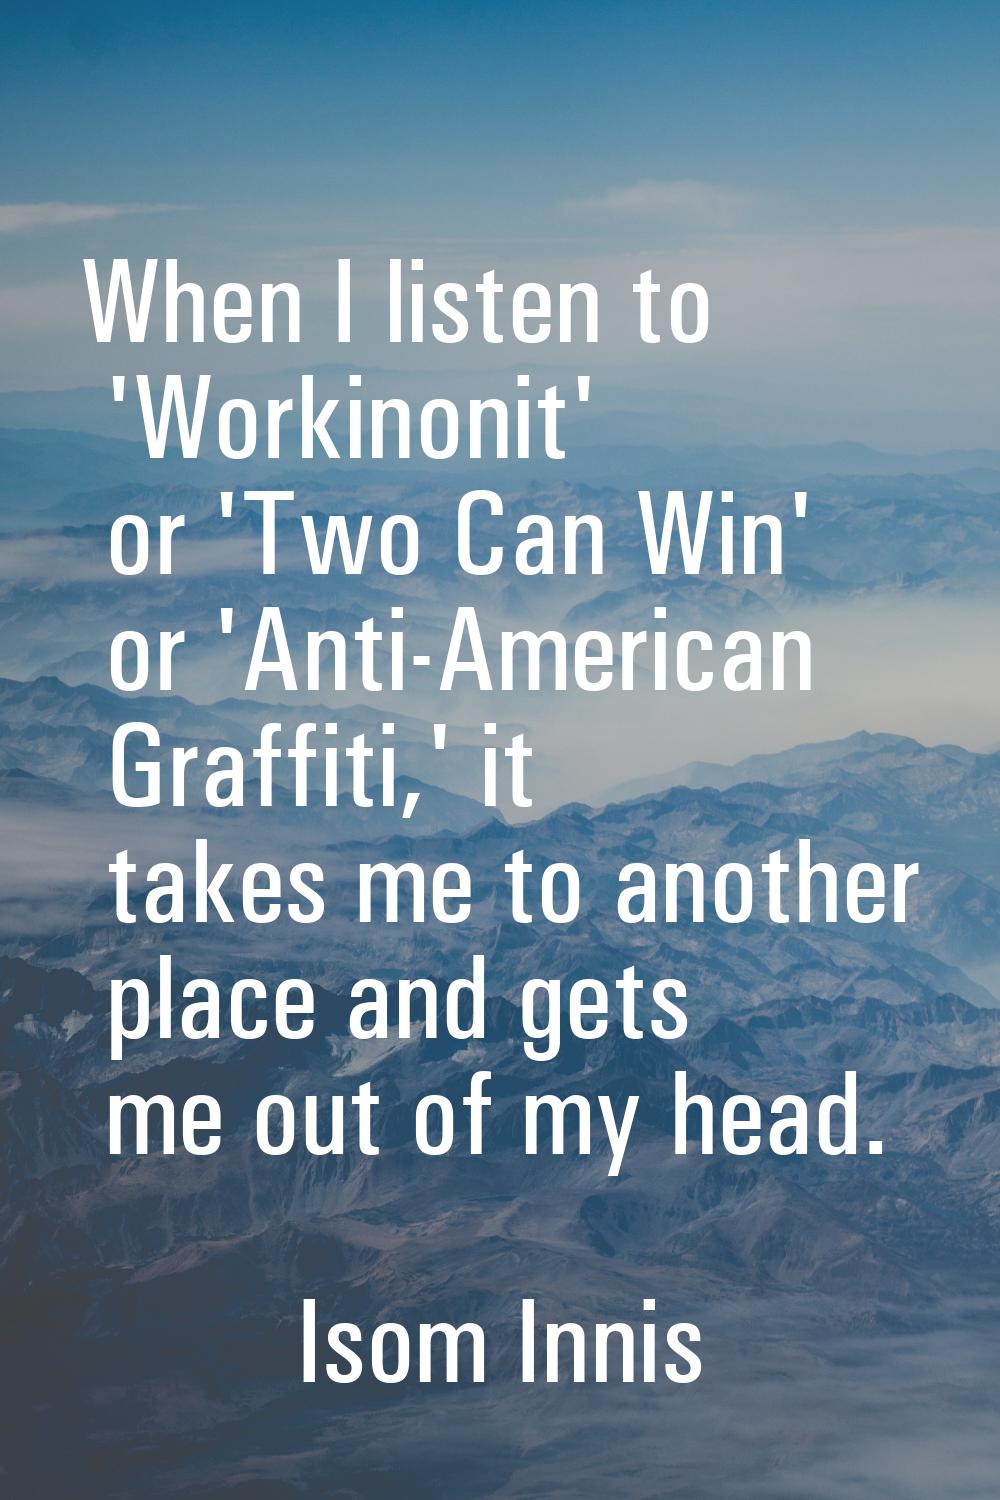 When I listen to 'Workinonit' or 'Two Can Win' or 'Anti-American Graffiti,' it takes me to another 